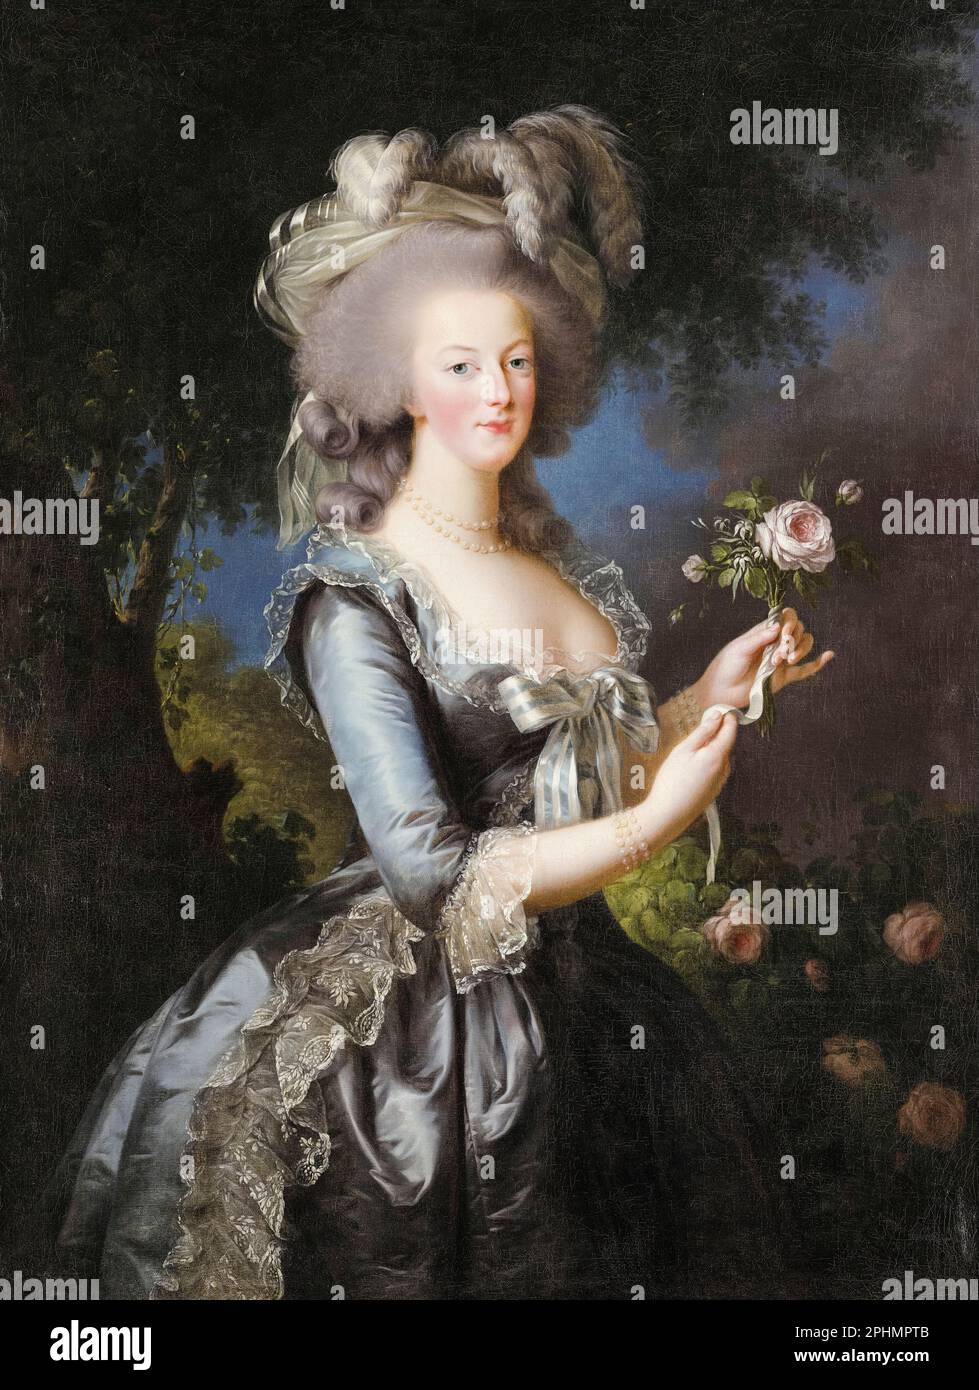 Marie-Antoinette (1755-1793), Queen of France, portrait painting by Elisabeth Vigee Le Brun, 1783 Stock Photo